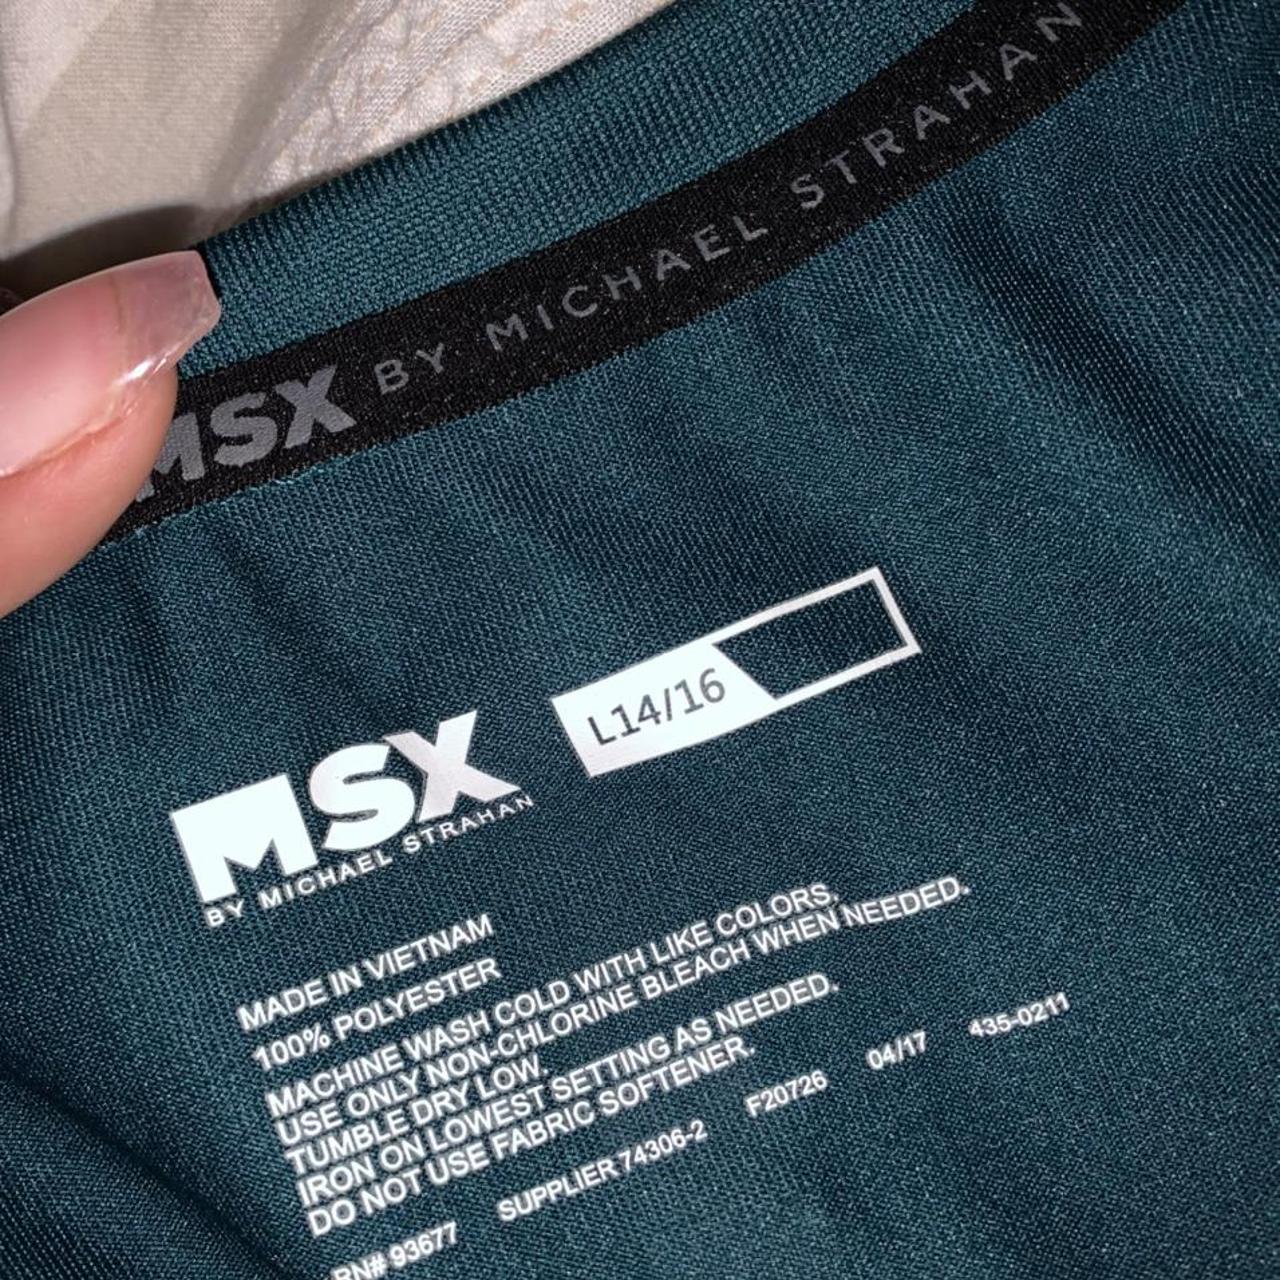 Product Image 4 - size: L
brand: MSX
condition: like new
summer